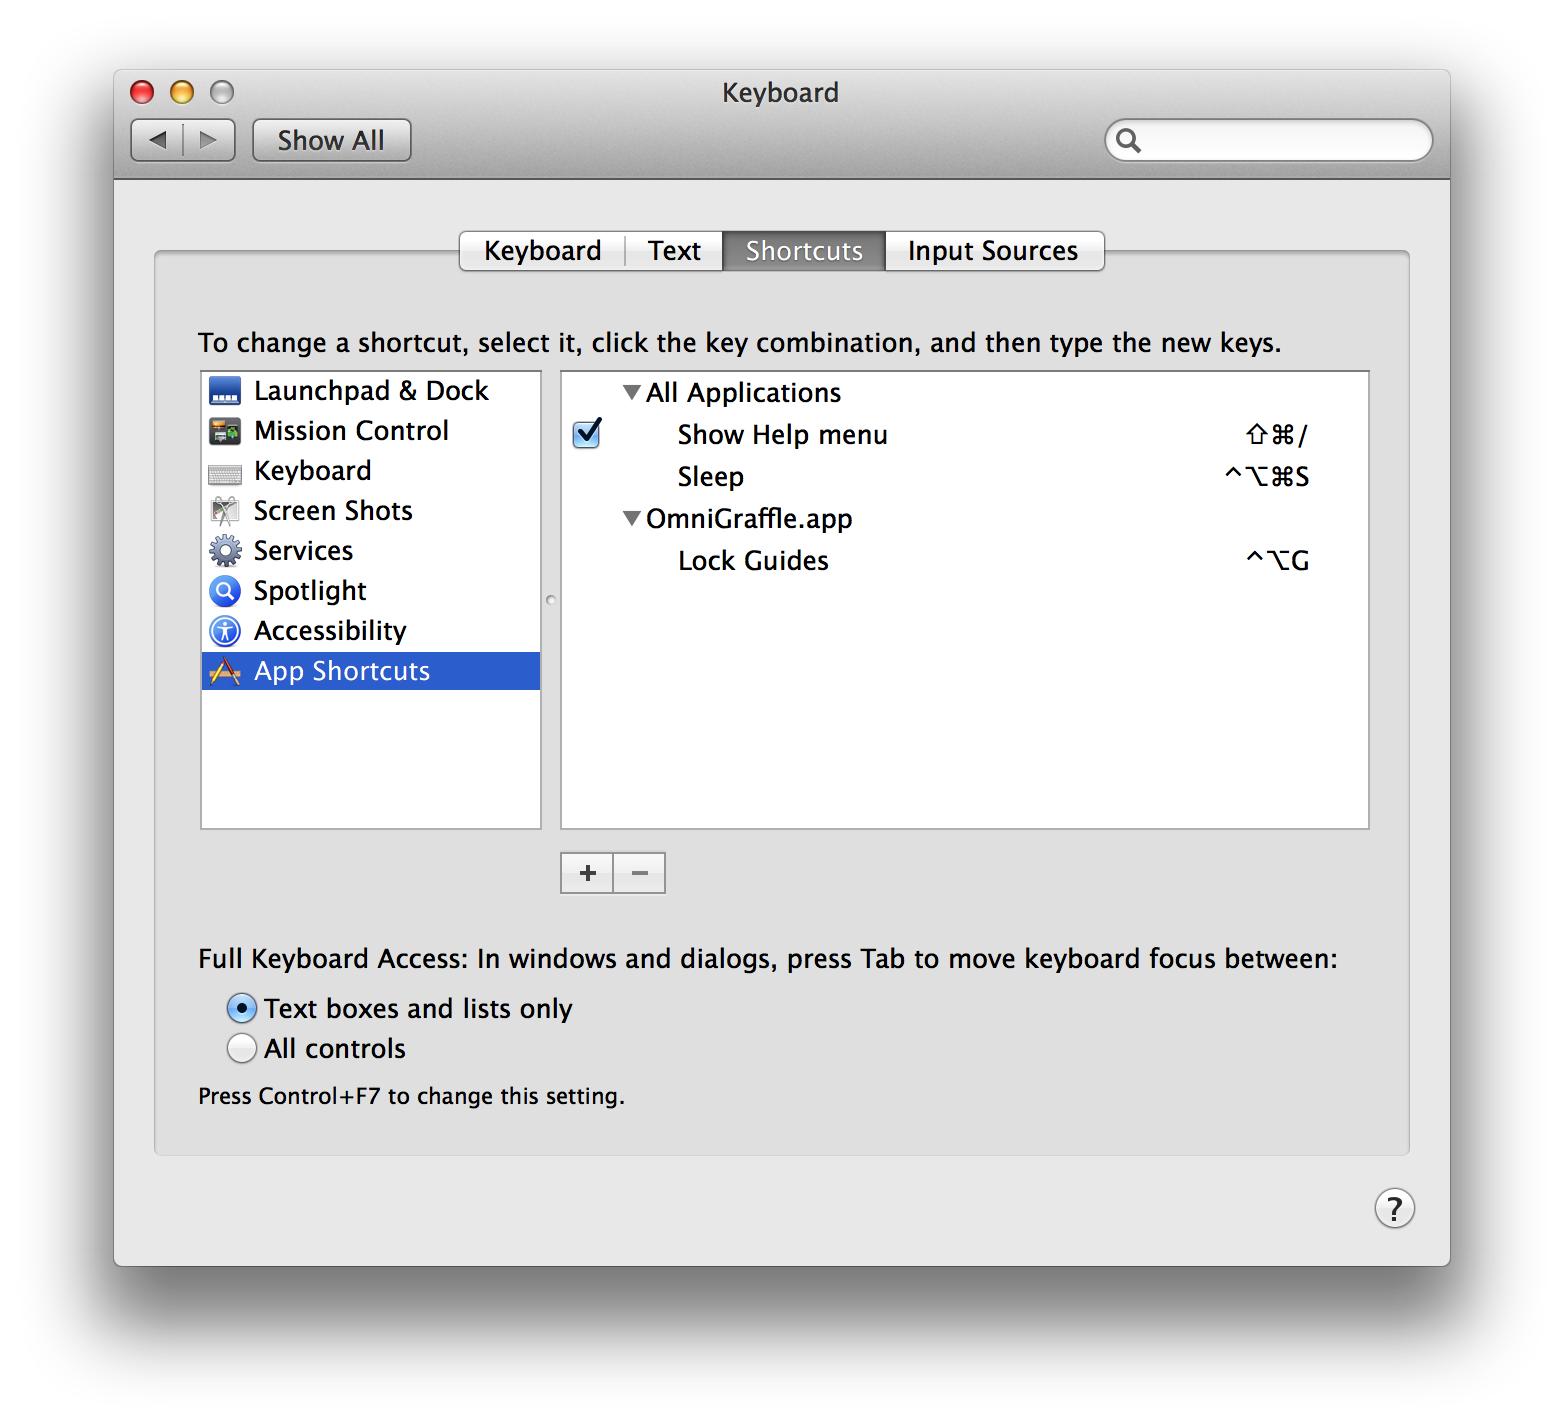 Use the Shortcuts section of the Keyboard preference panel to create and manage custom keyboard shortcuts on your Mac